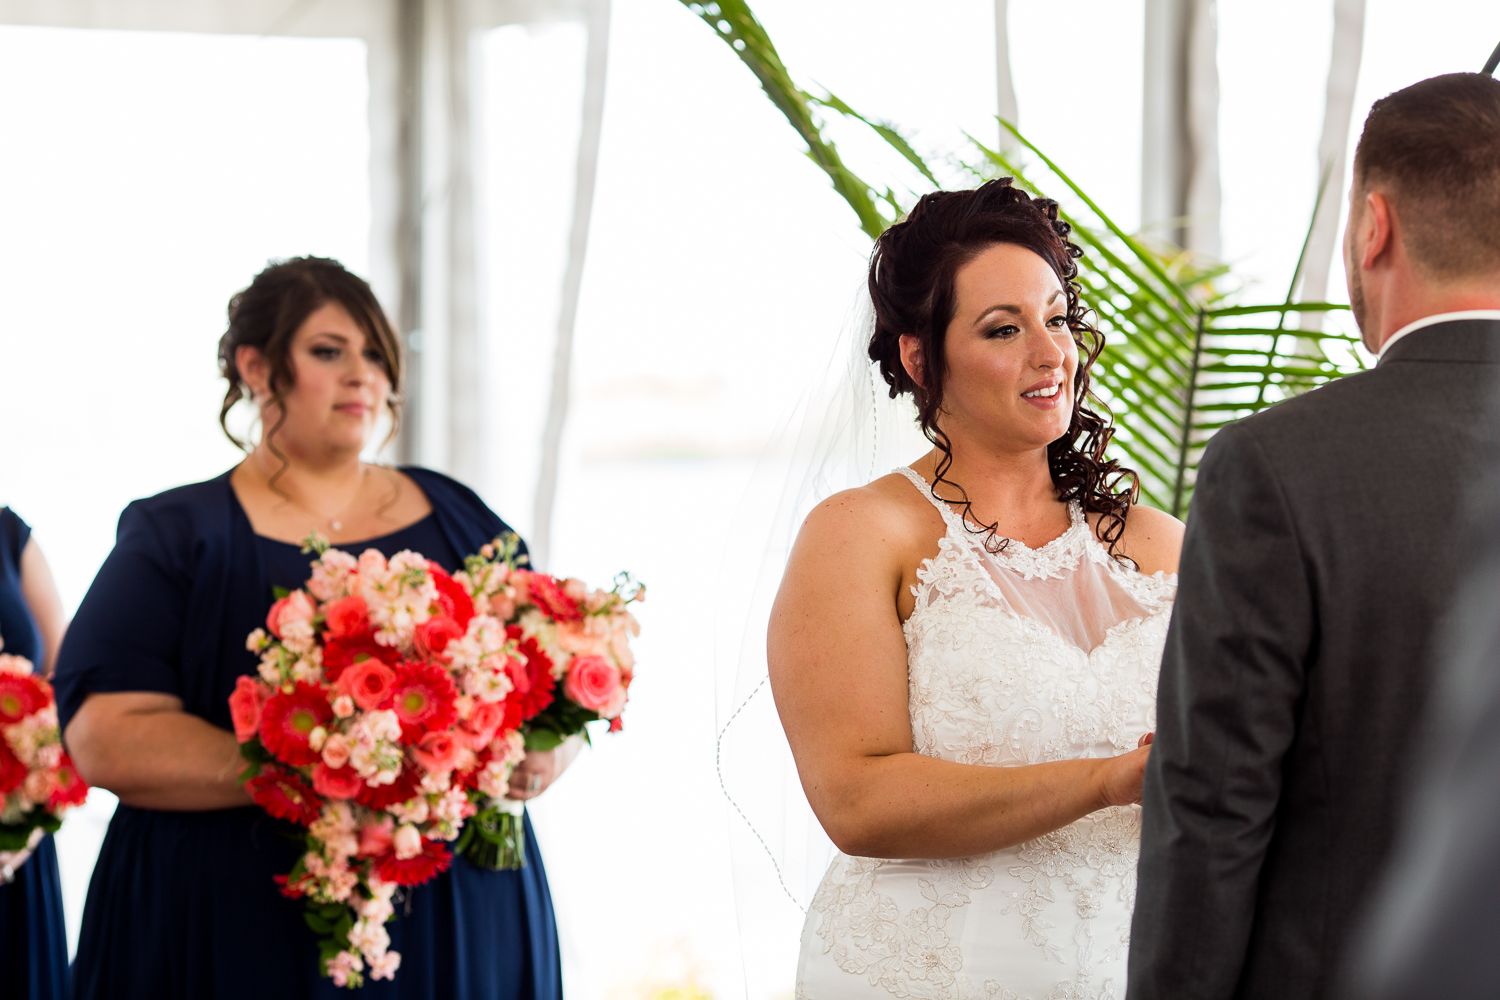  Bride looks at groom and says vows during wedding ceremony. 